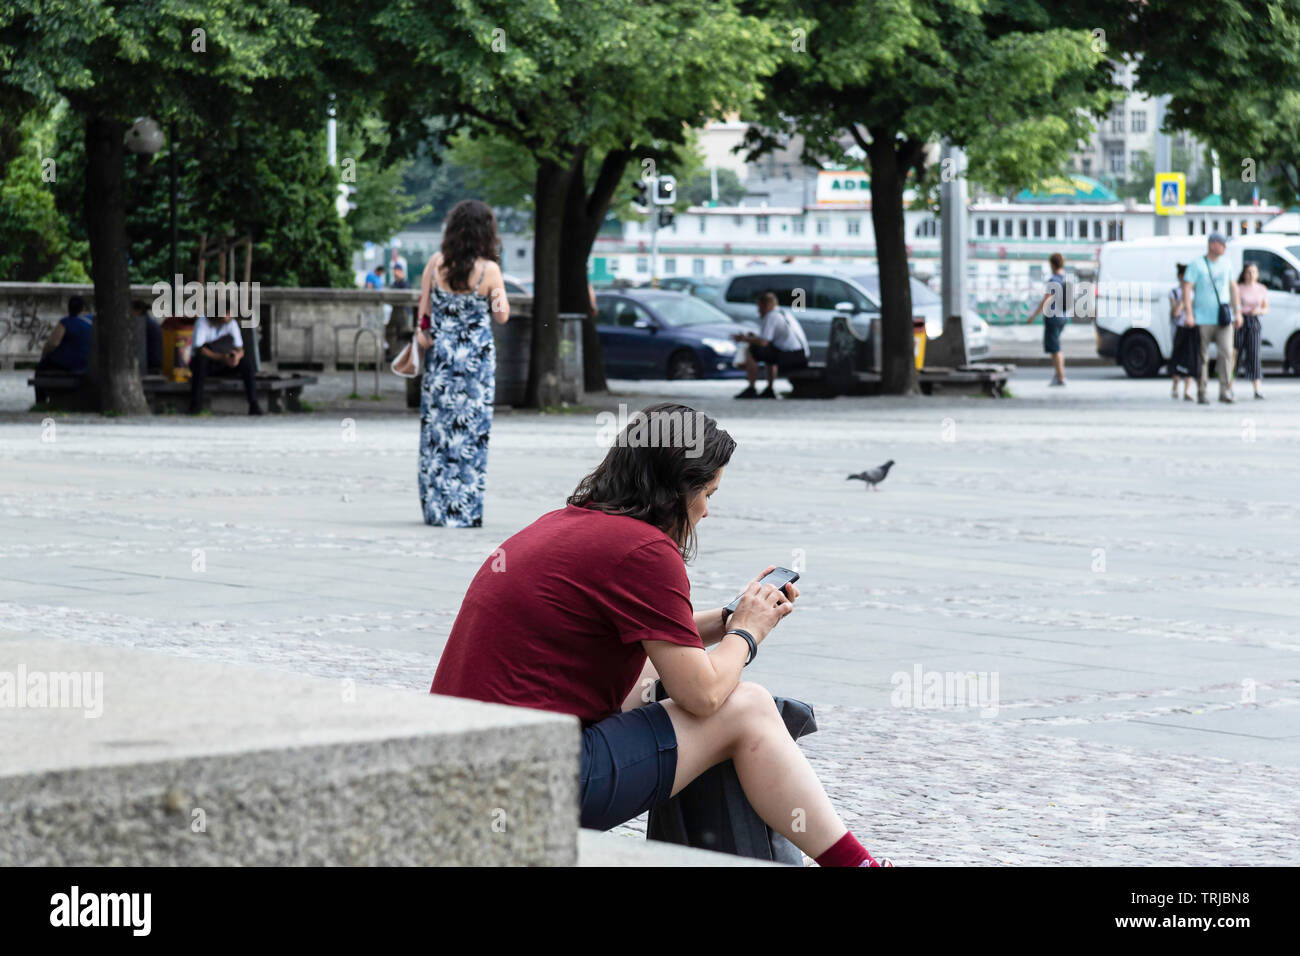 Female sitting on steps at a Square in Prague EU, reading her text messages, background blurred people, trees and cars Stock Photo